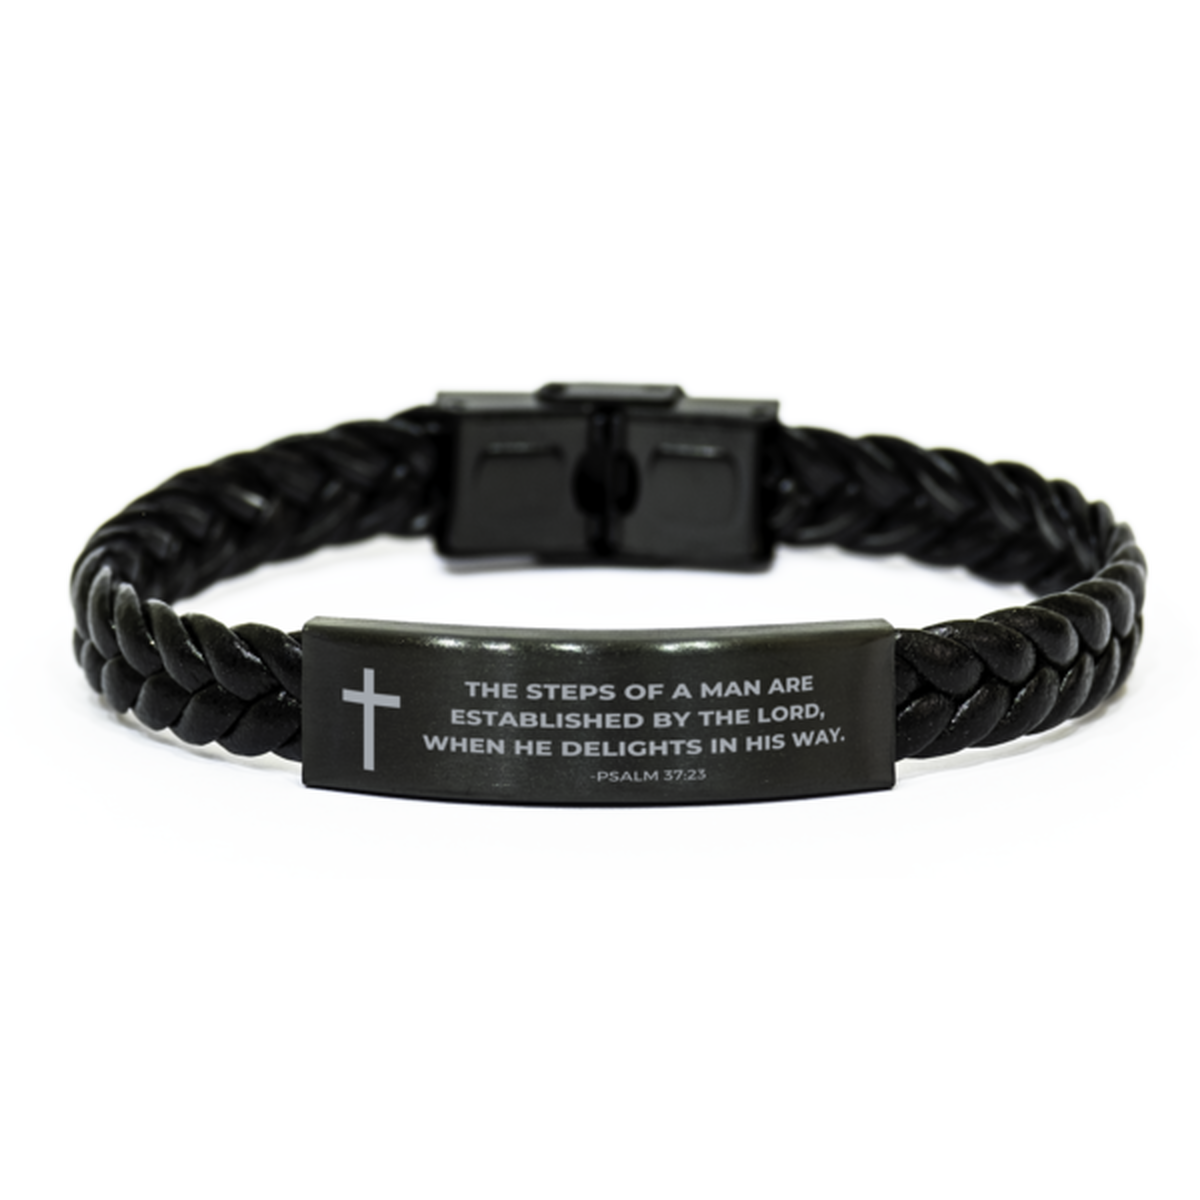 Baptism Gifts For Teenage Boys Girls, Christian Bible Verse Braided Leather Bracelet, The steps of a man are, Catholic Confirmation Gifts for Son, Godson, Grandson, Nephew